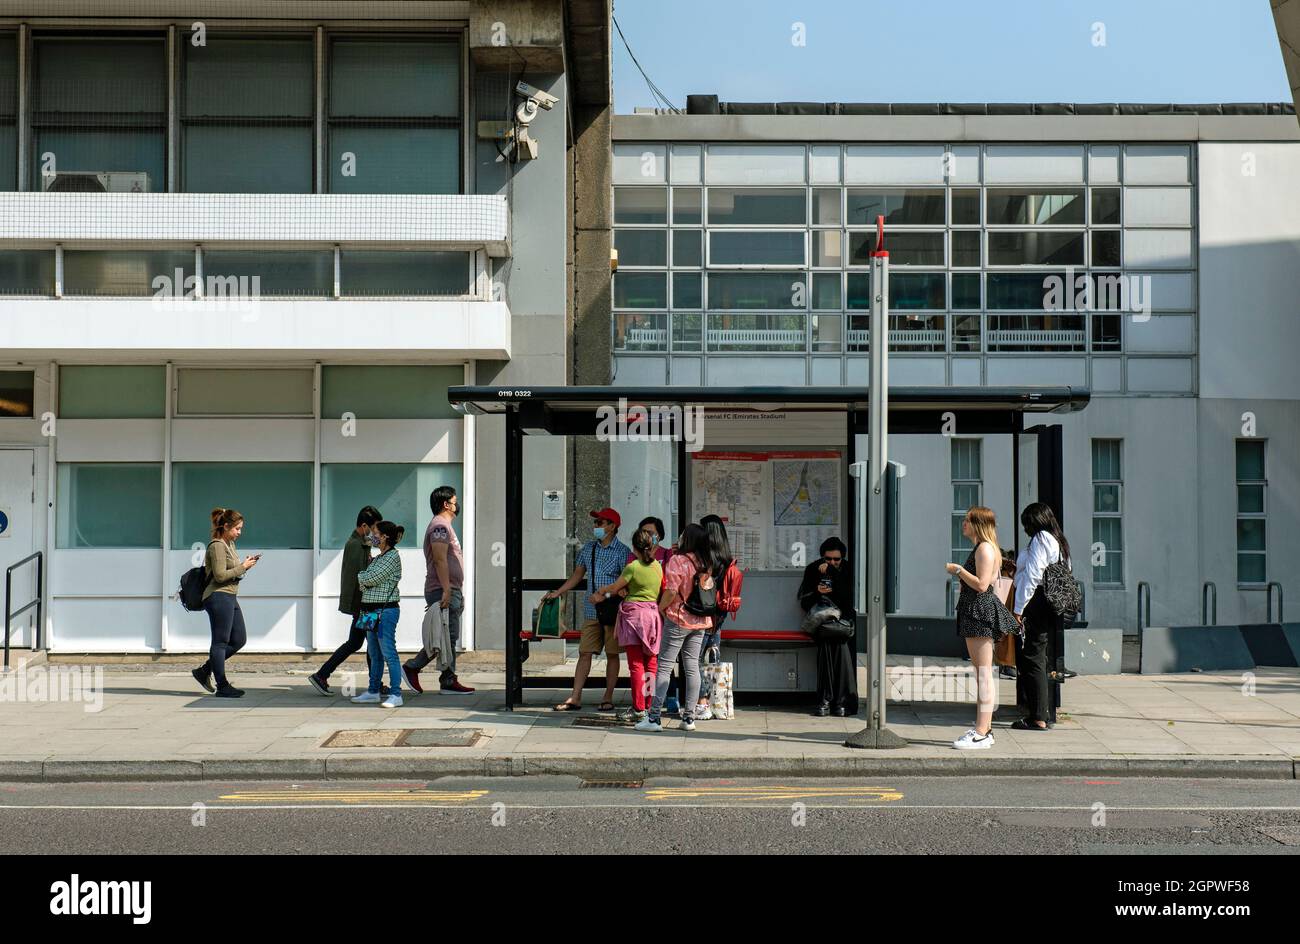 People queuing at bus stop, Holloway Road, London Brough of Islington, England Britain UK Stock Photo